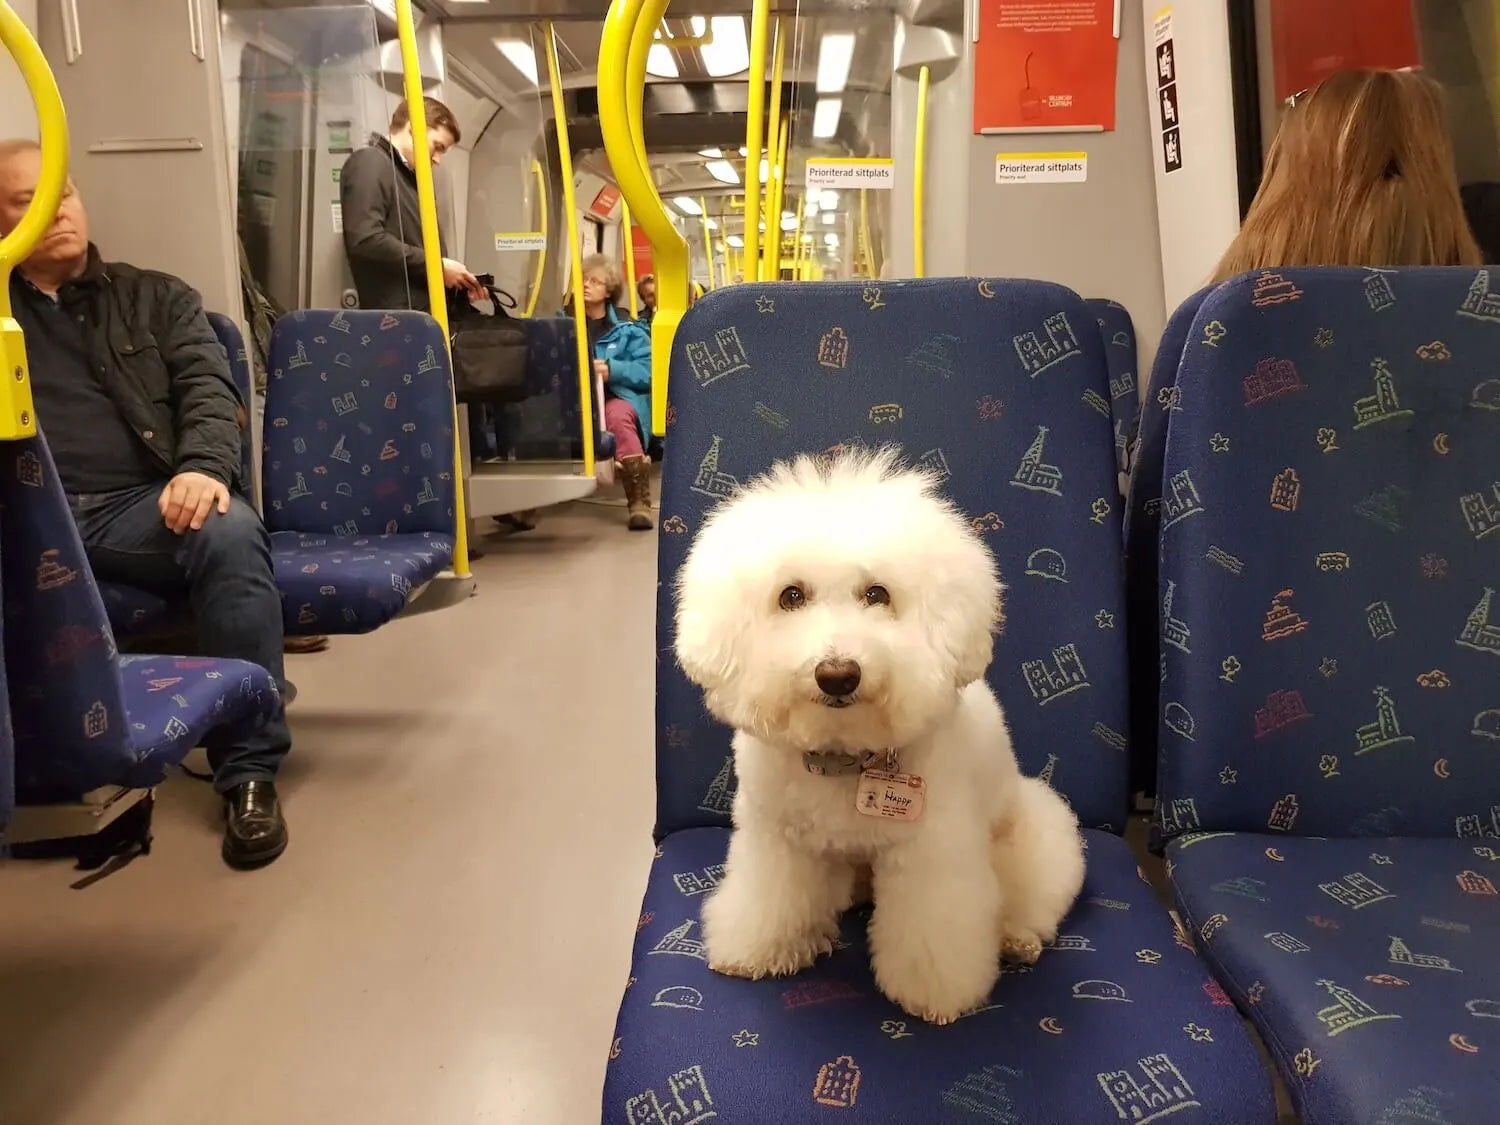 Riding on the subway